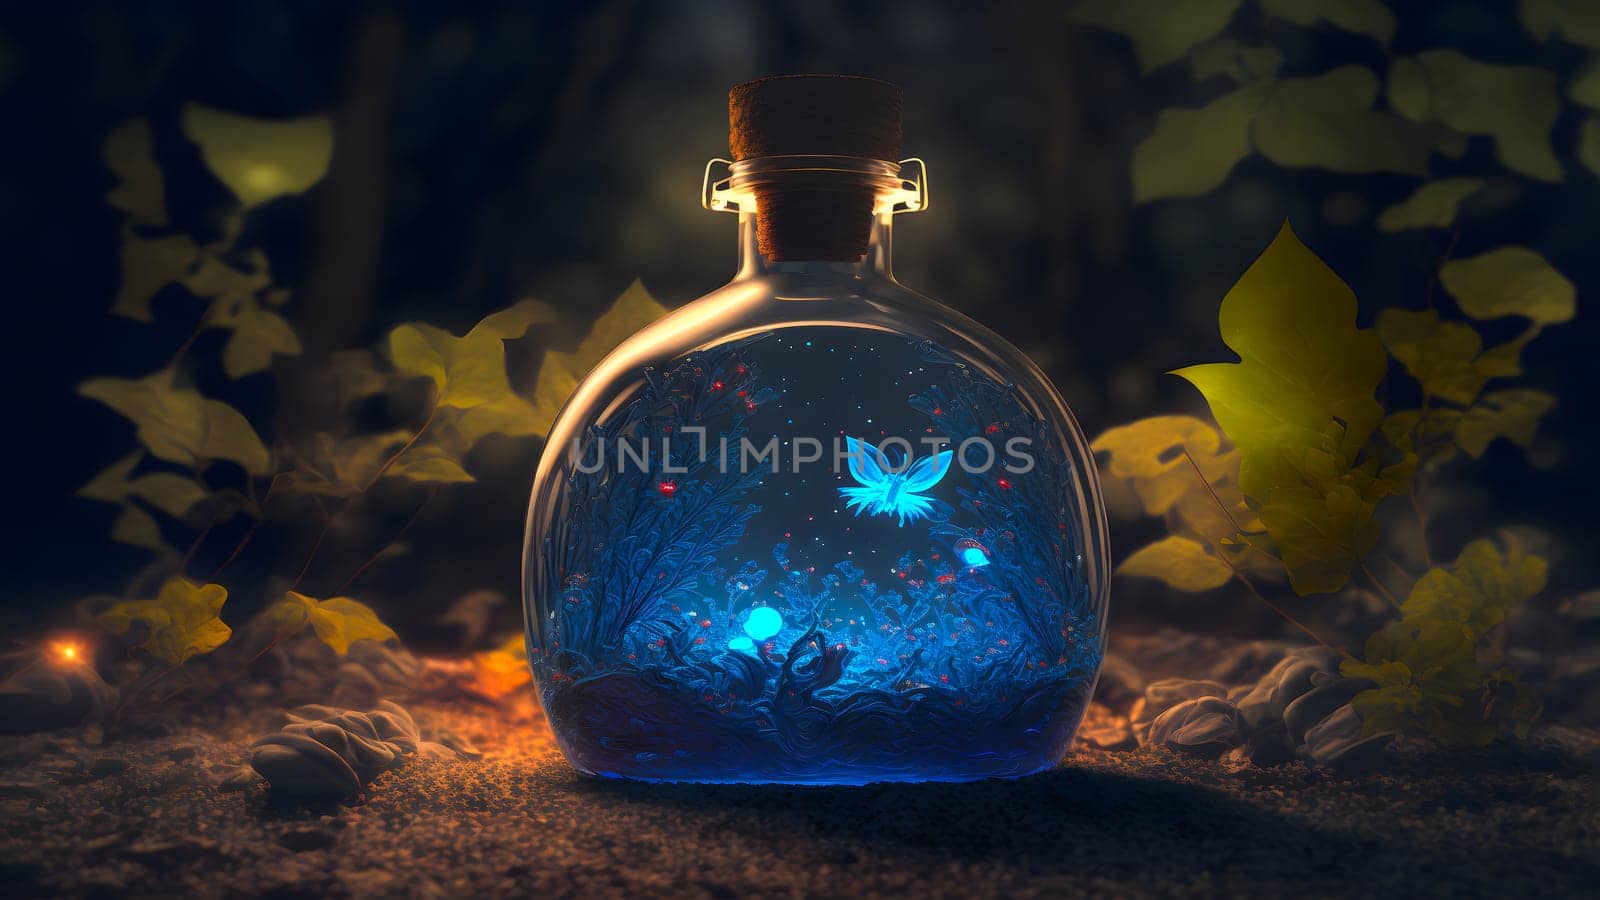 glowing potion bottle with magic butterfly inside on night forest ground, neural network generated art by z1b